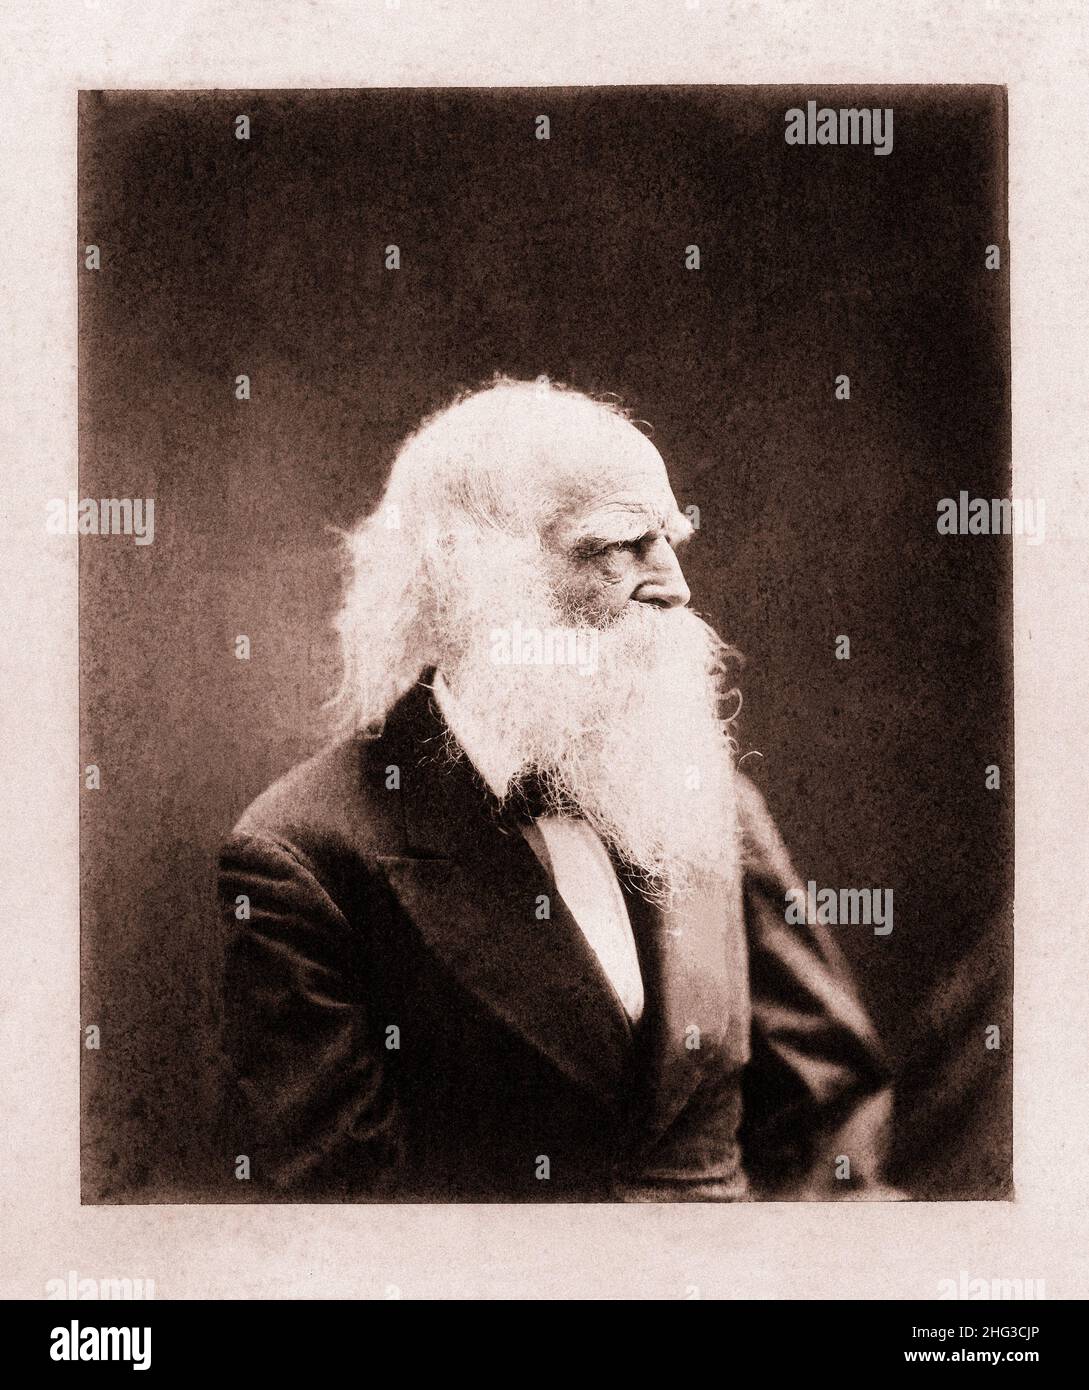 Vintage lithograph of William Cullen Bryant.  William Cullen Bryant (1794 – 1878) was an American romantic poet, journalist, and long-time editor of t Stock Photo